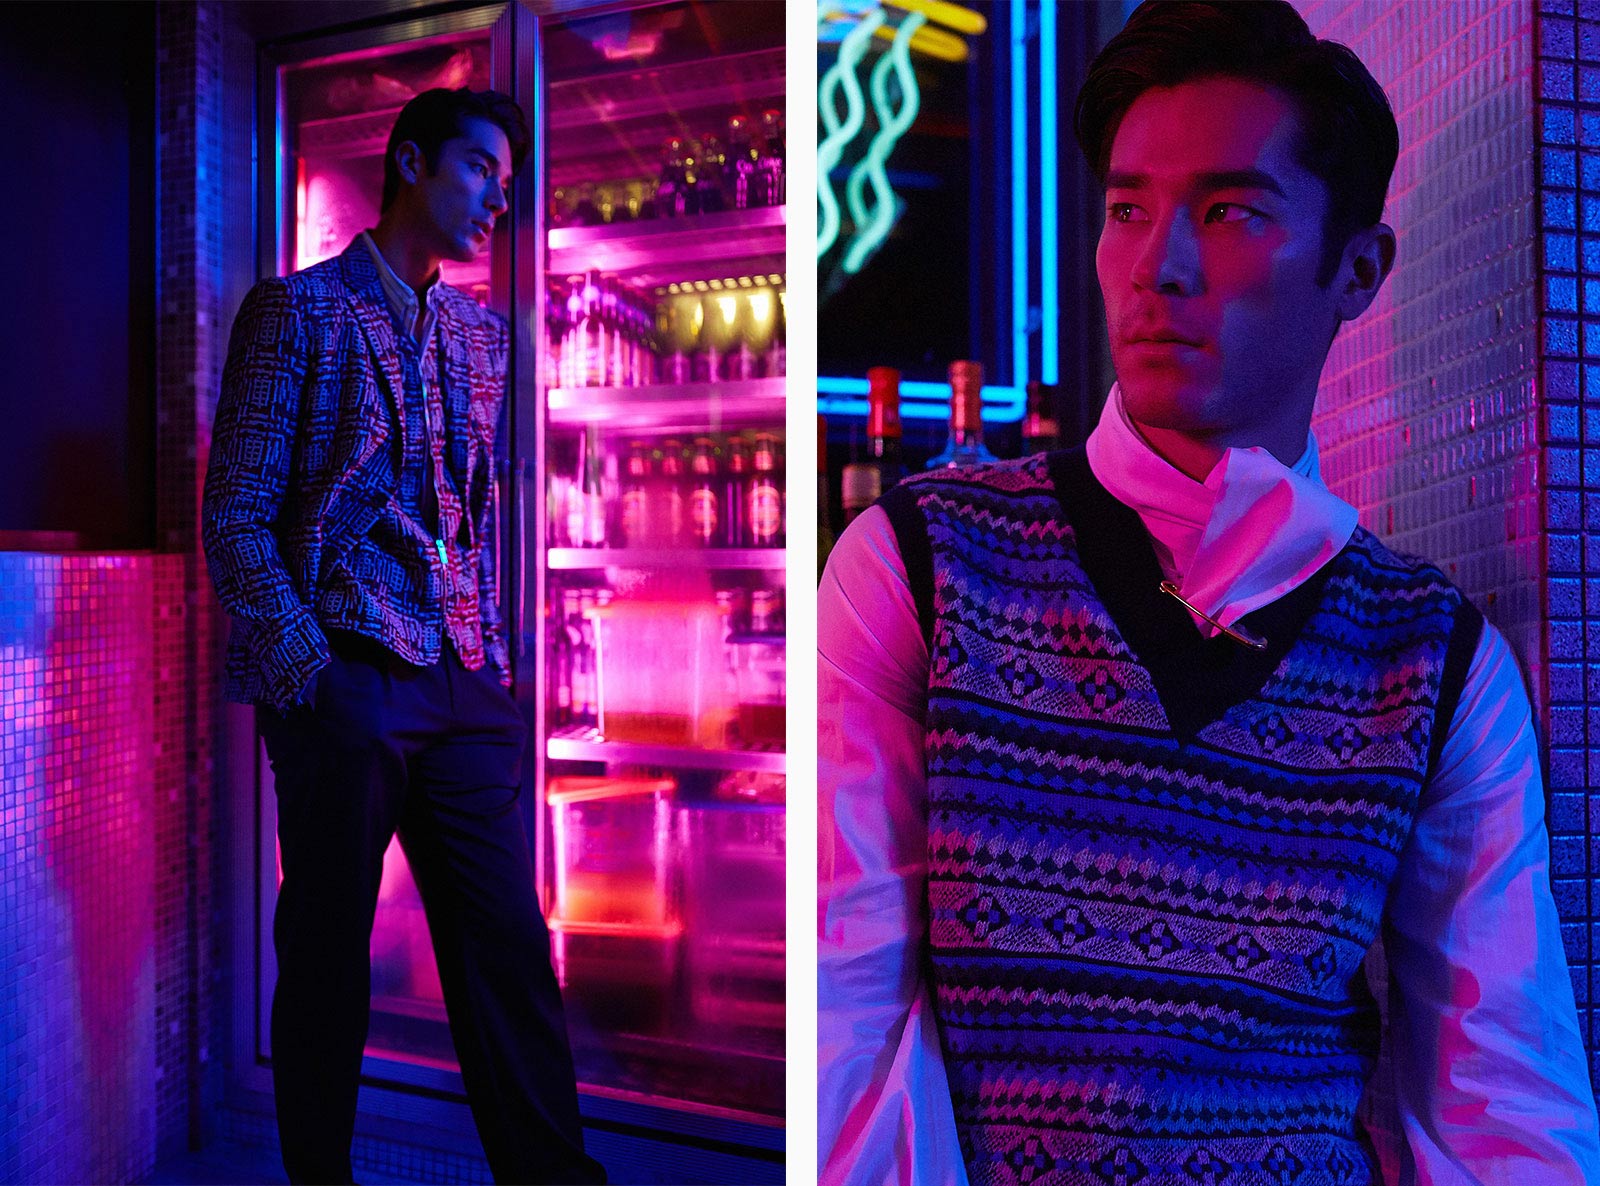 A model wears new season Giorgio Armani and Burberry while poses in a neon-lit bar